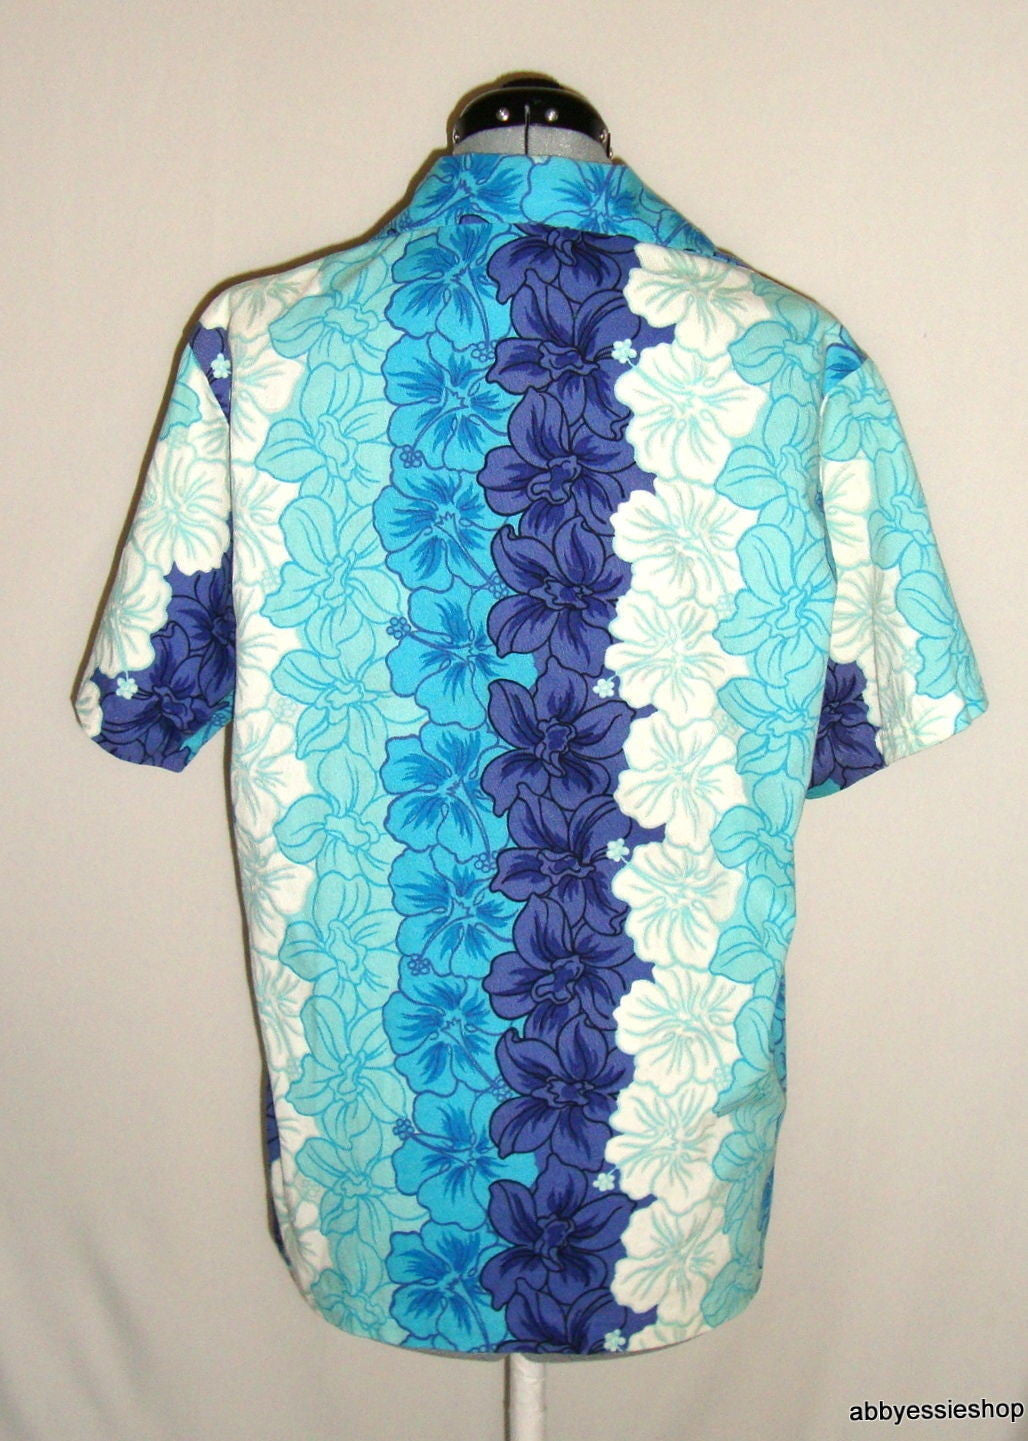 Vtg Auth Hawaii Resort Shops Turquoise Floral Shirt Abby Essie